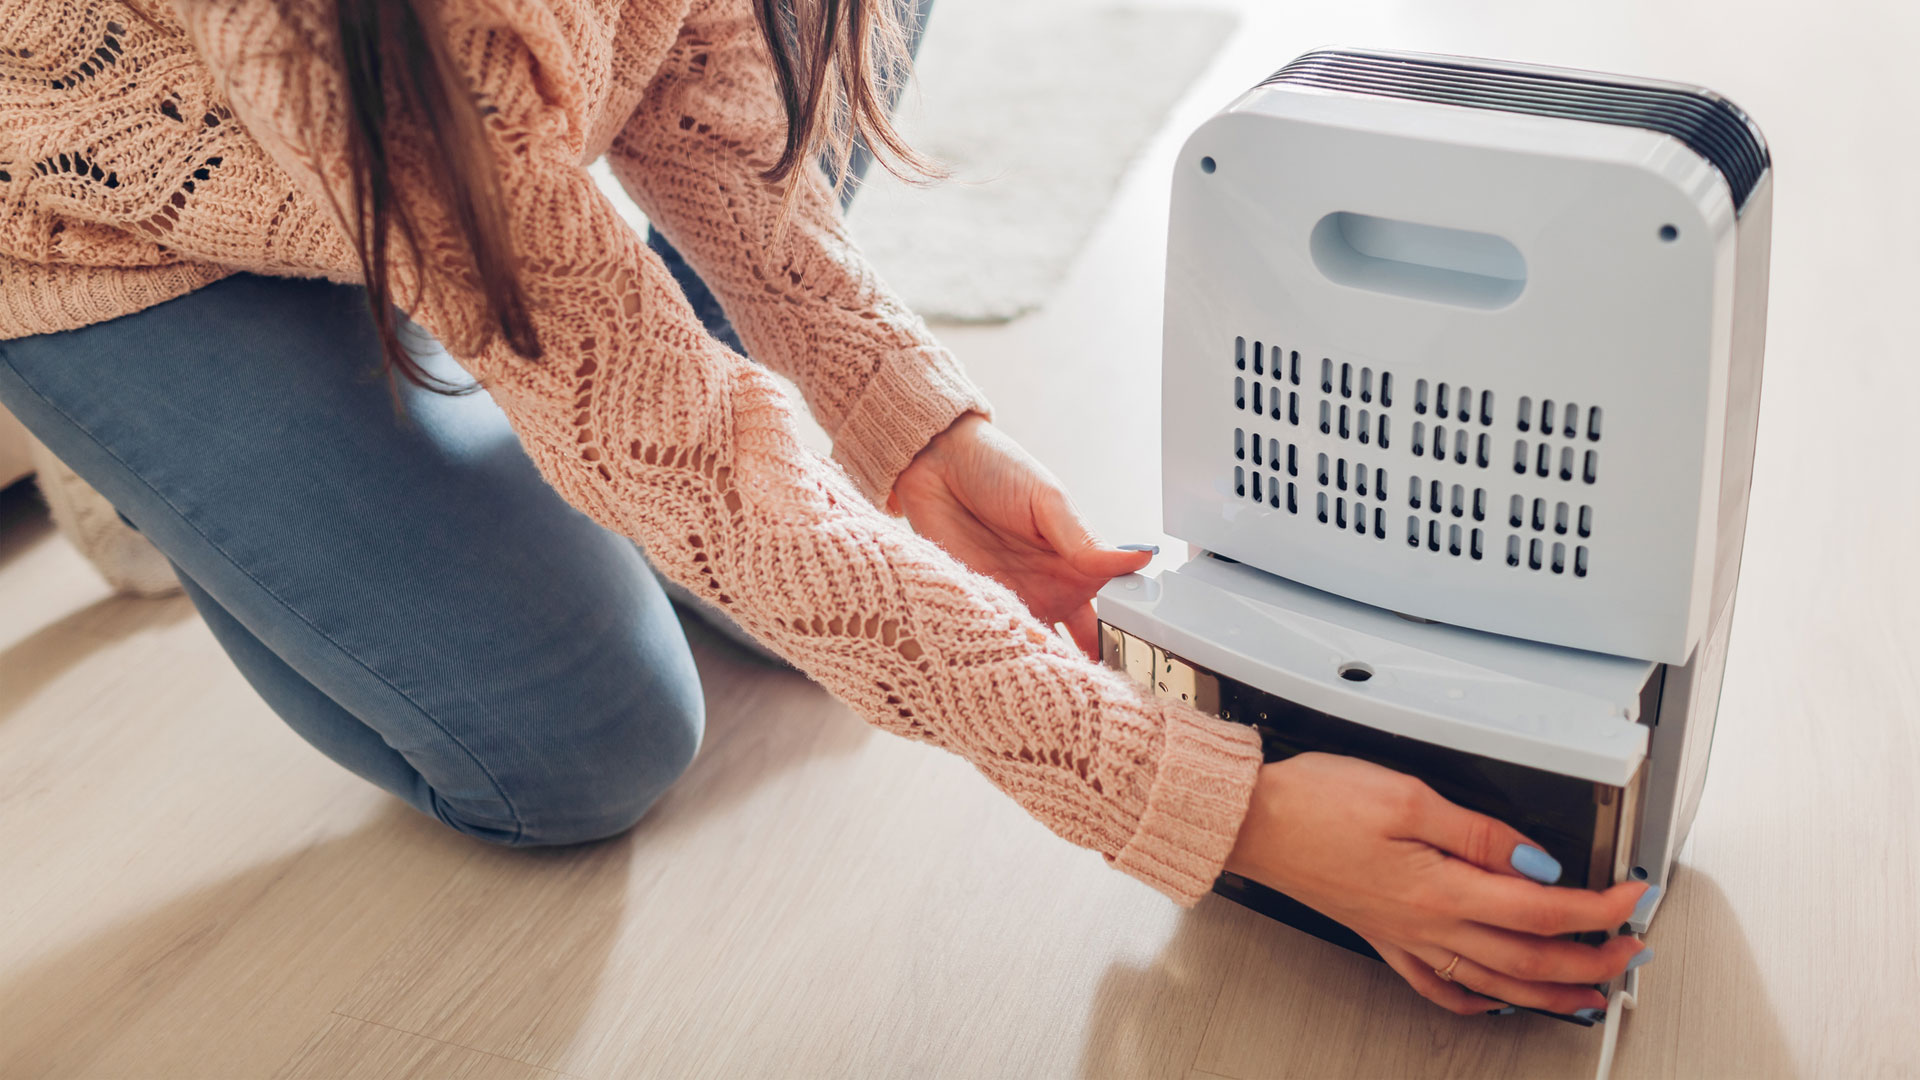 What Are the Benefits of Buying a Dehumidifier